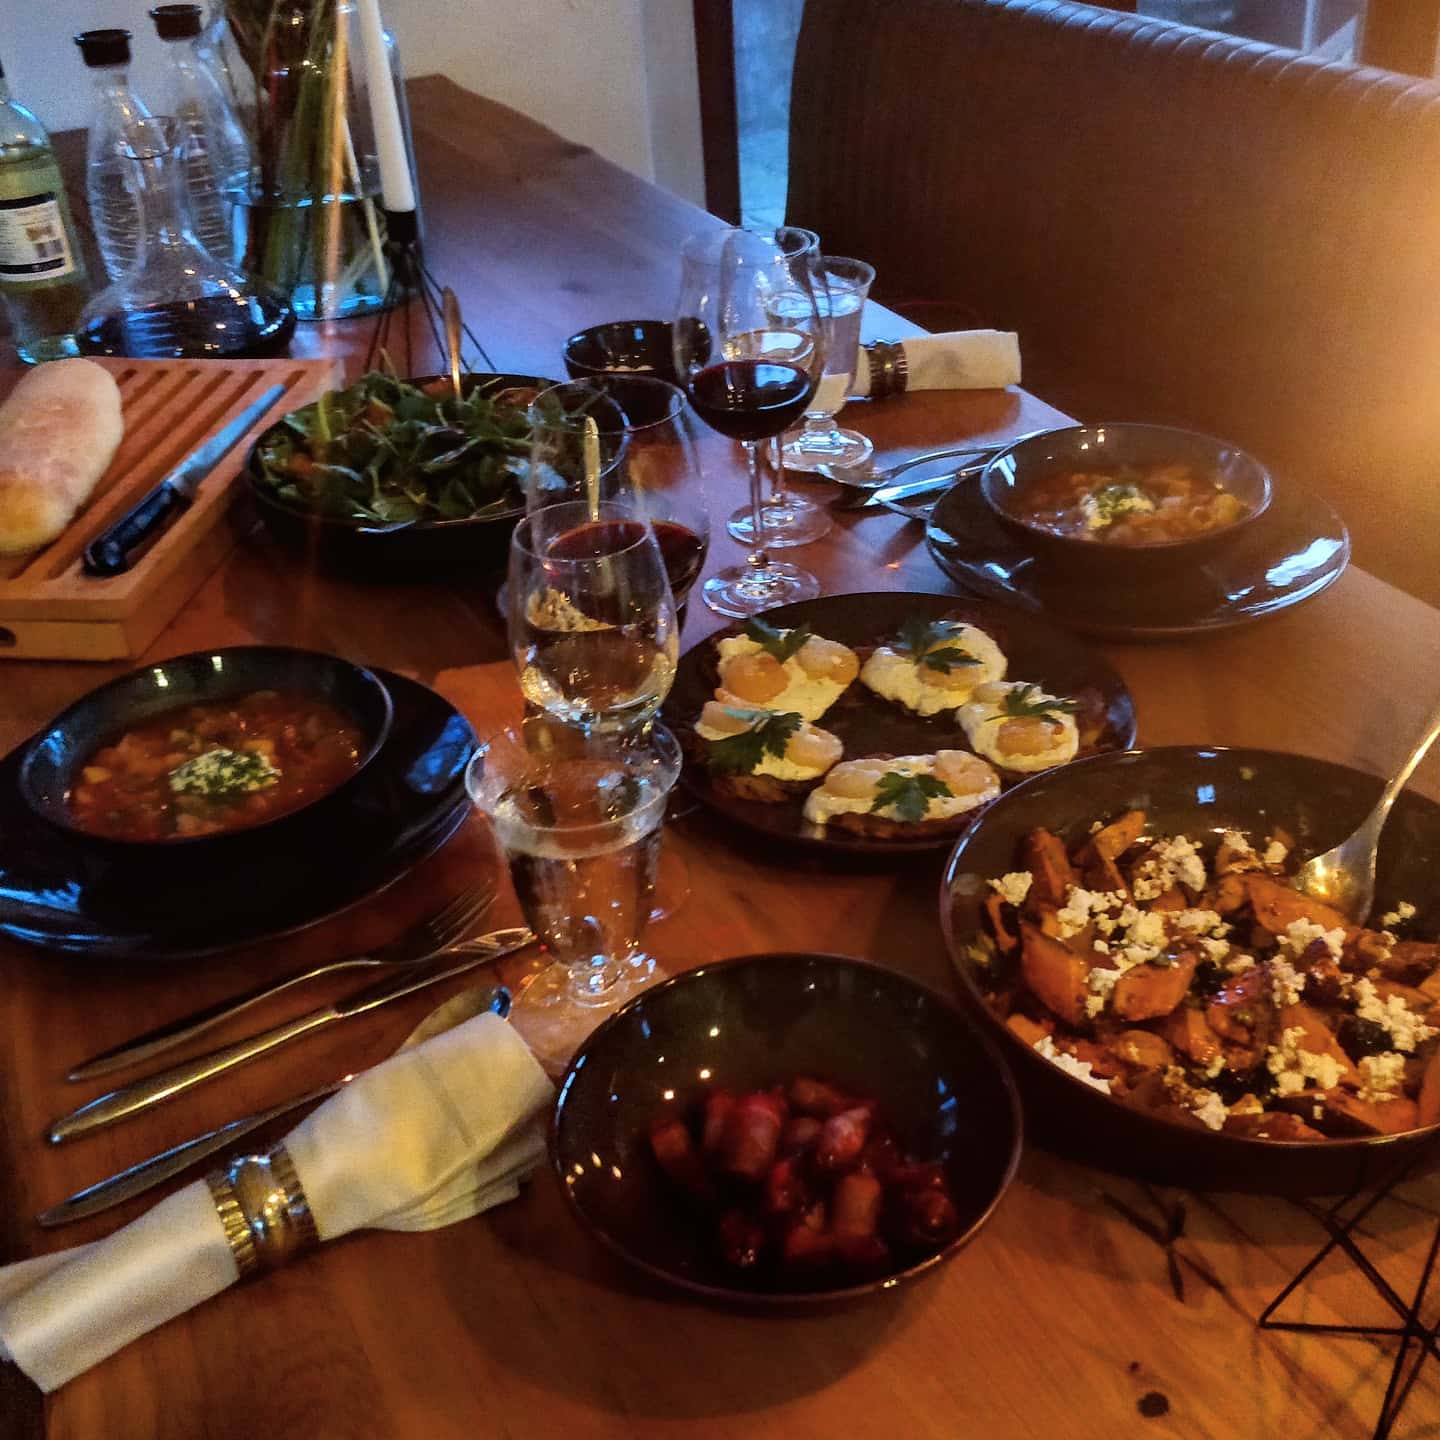 When my wife and me decide to prepare some #tapas for two because there are some things to #celebrate we could easily feed four... but this will create some nice meals for the next couple of days.